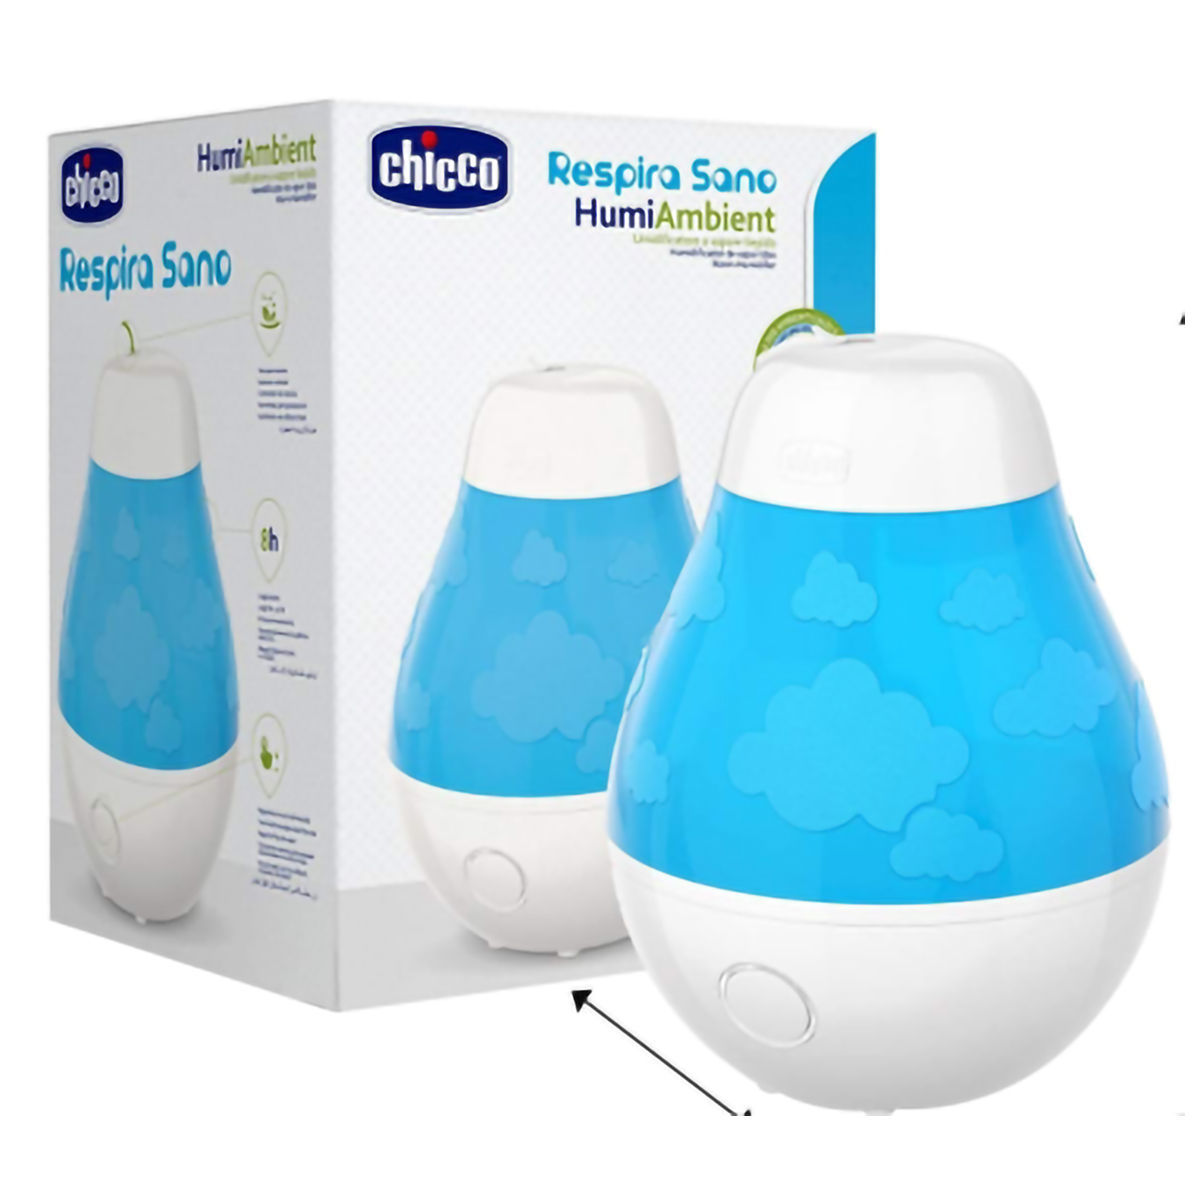 Buy Chicco Respira Sano Humi Ambient Humidifier, 1 Count Online